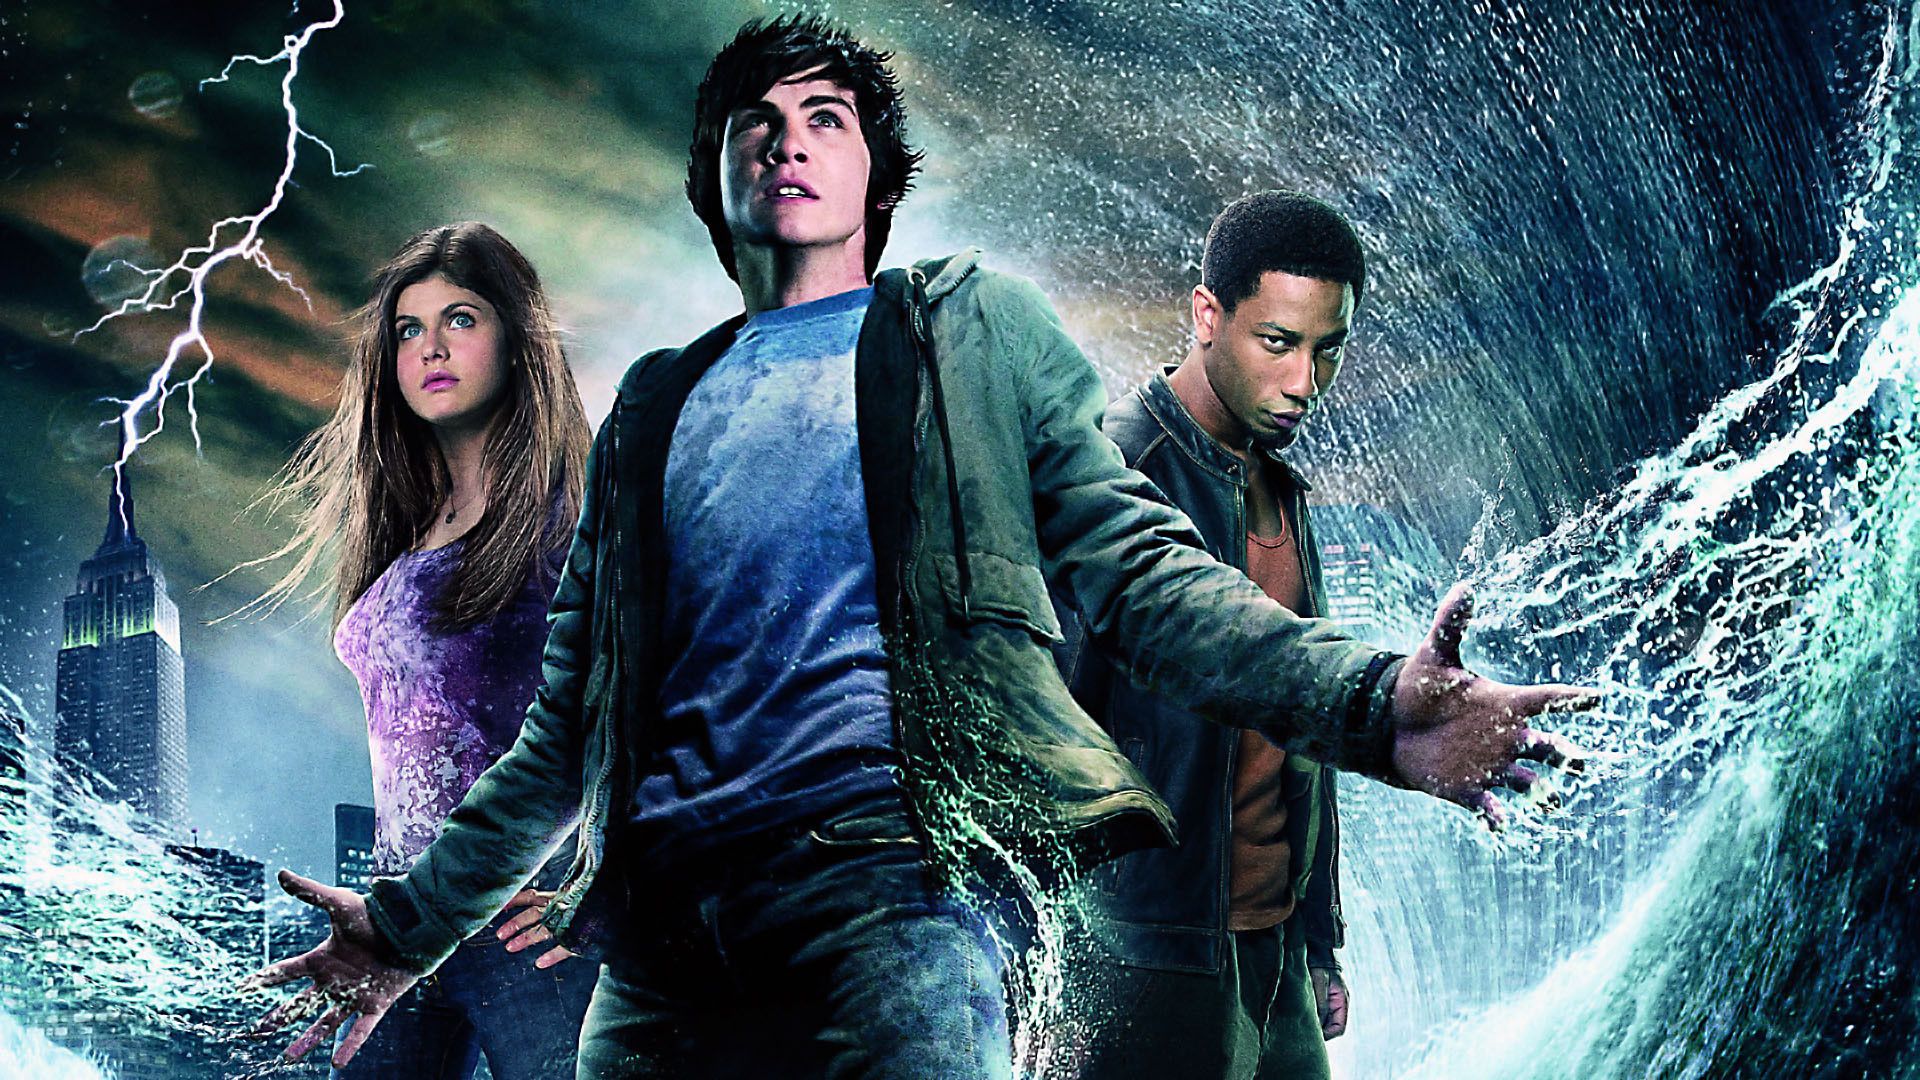 Percy Jackson and the Olympians Wallpaper: PercyJackson♥. Percy jackson movie, Percy jackson characters, Percy jackson wallpaper